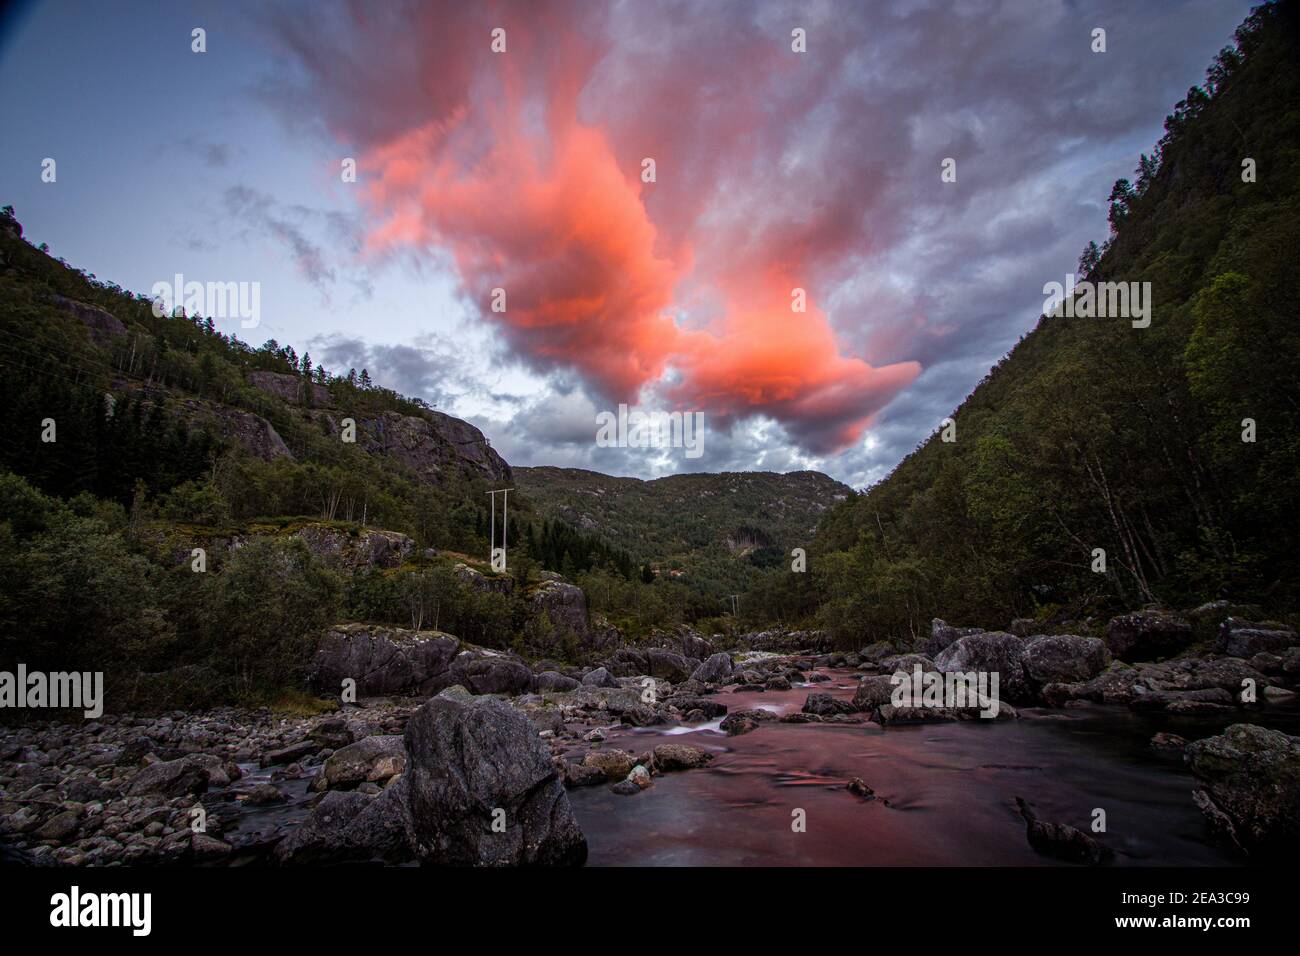 Sunset sky with dark red clouds in Norway Suldal, September 2020 Stock Photo